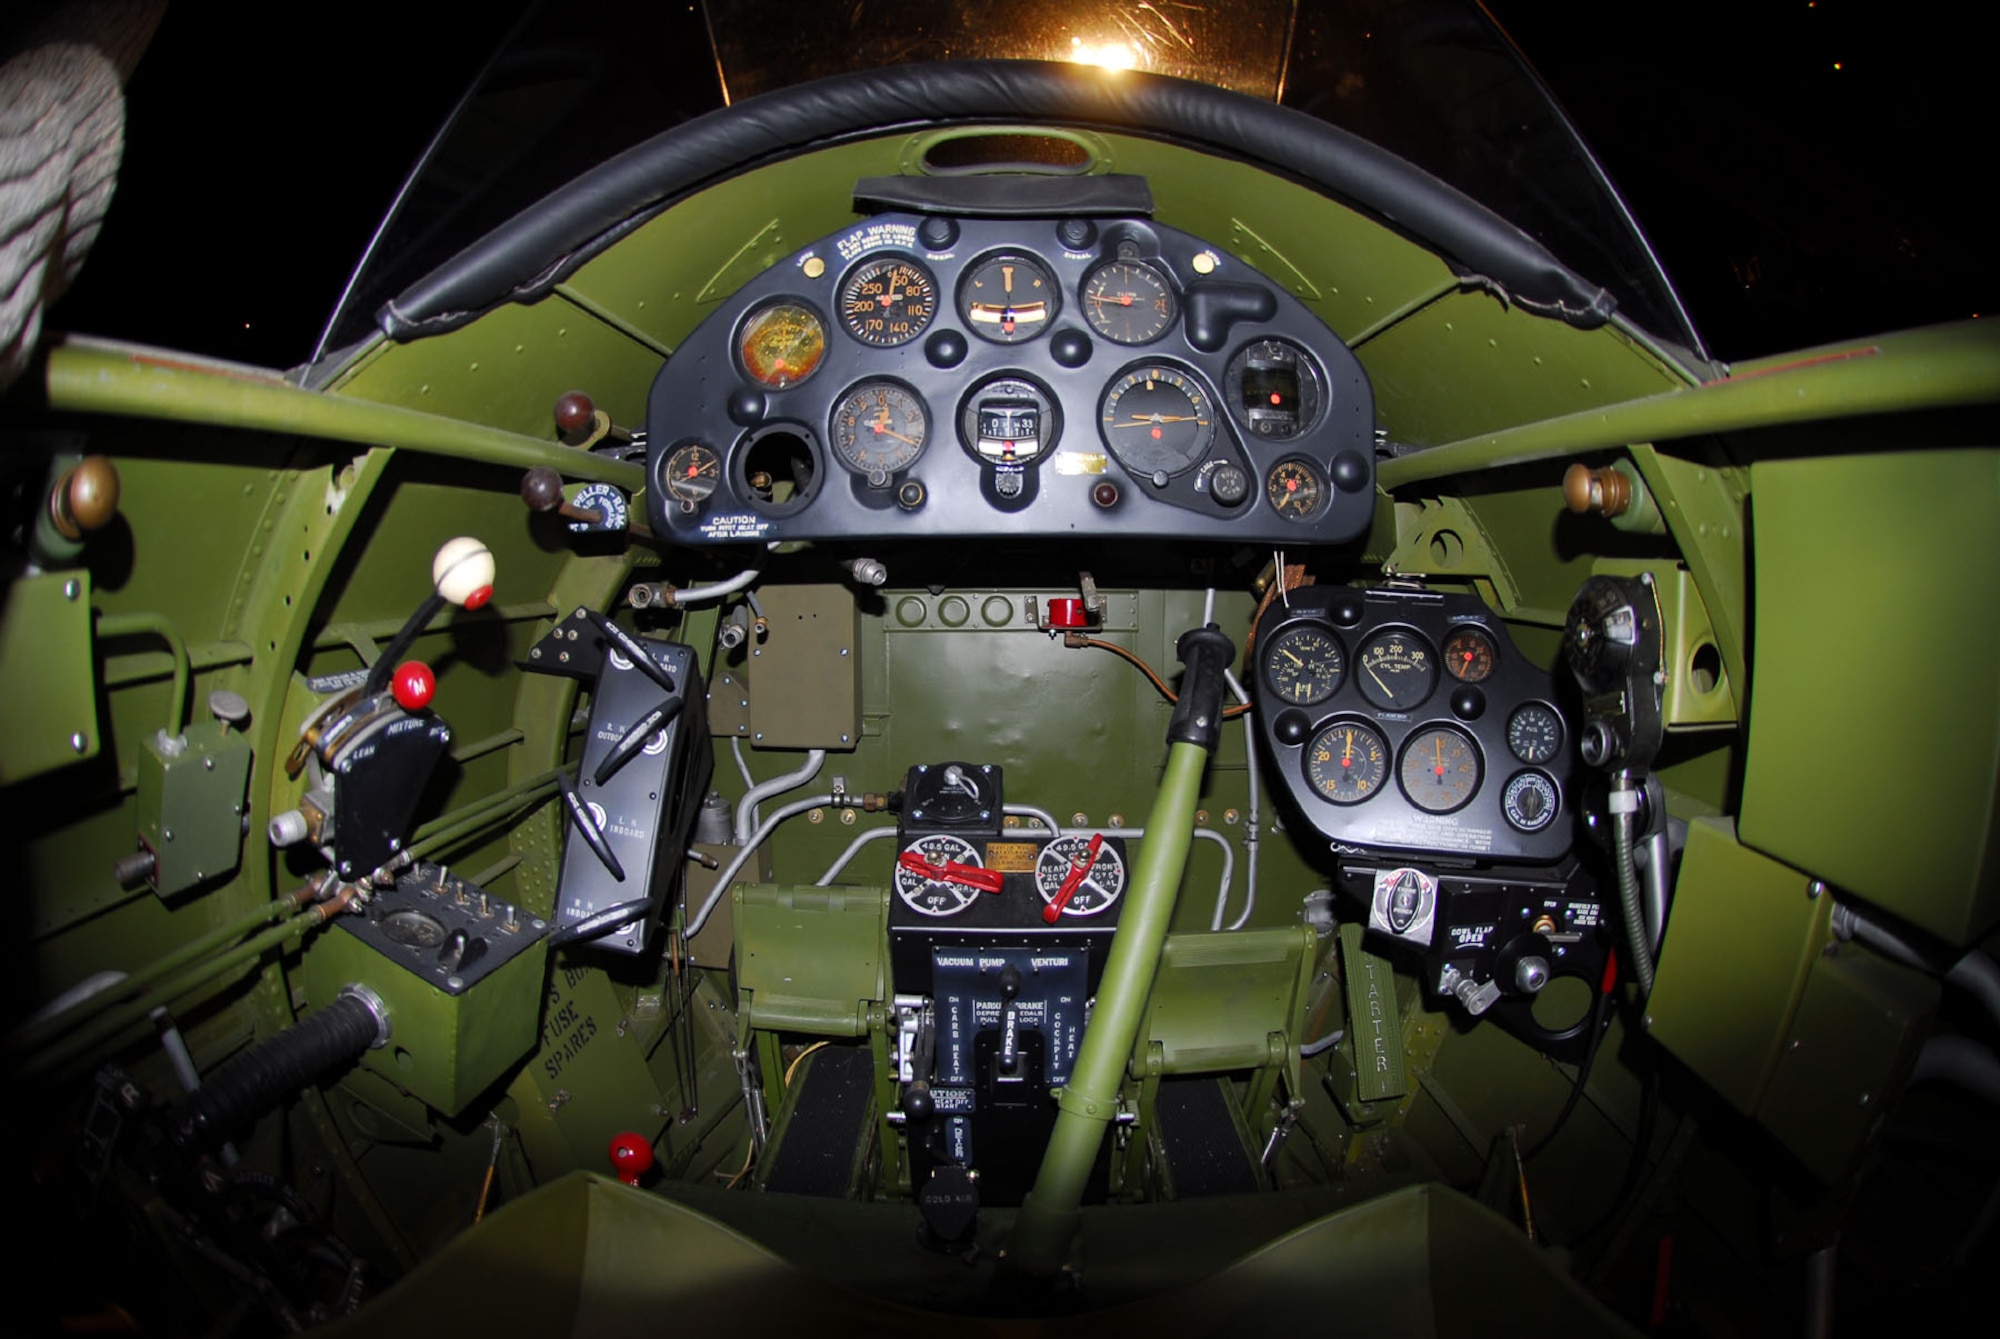 DAYTON, Ohio -- Northrop A-17A cockpit at the National Museum of the United States Air Force. (U.S. Air Force photo)